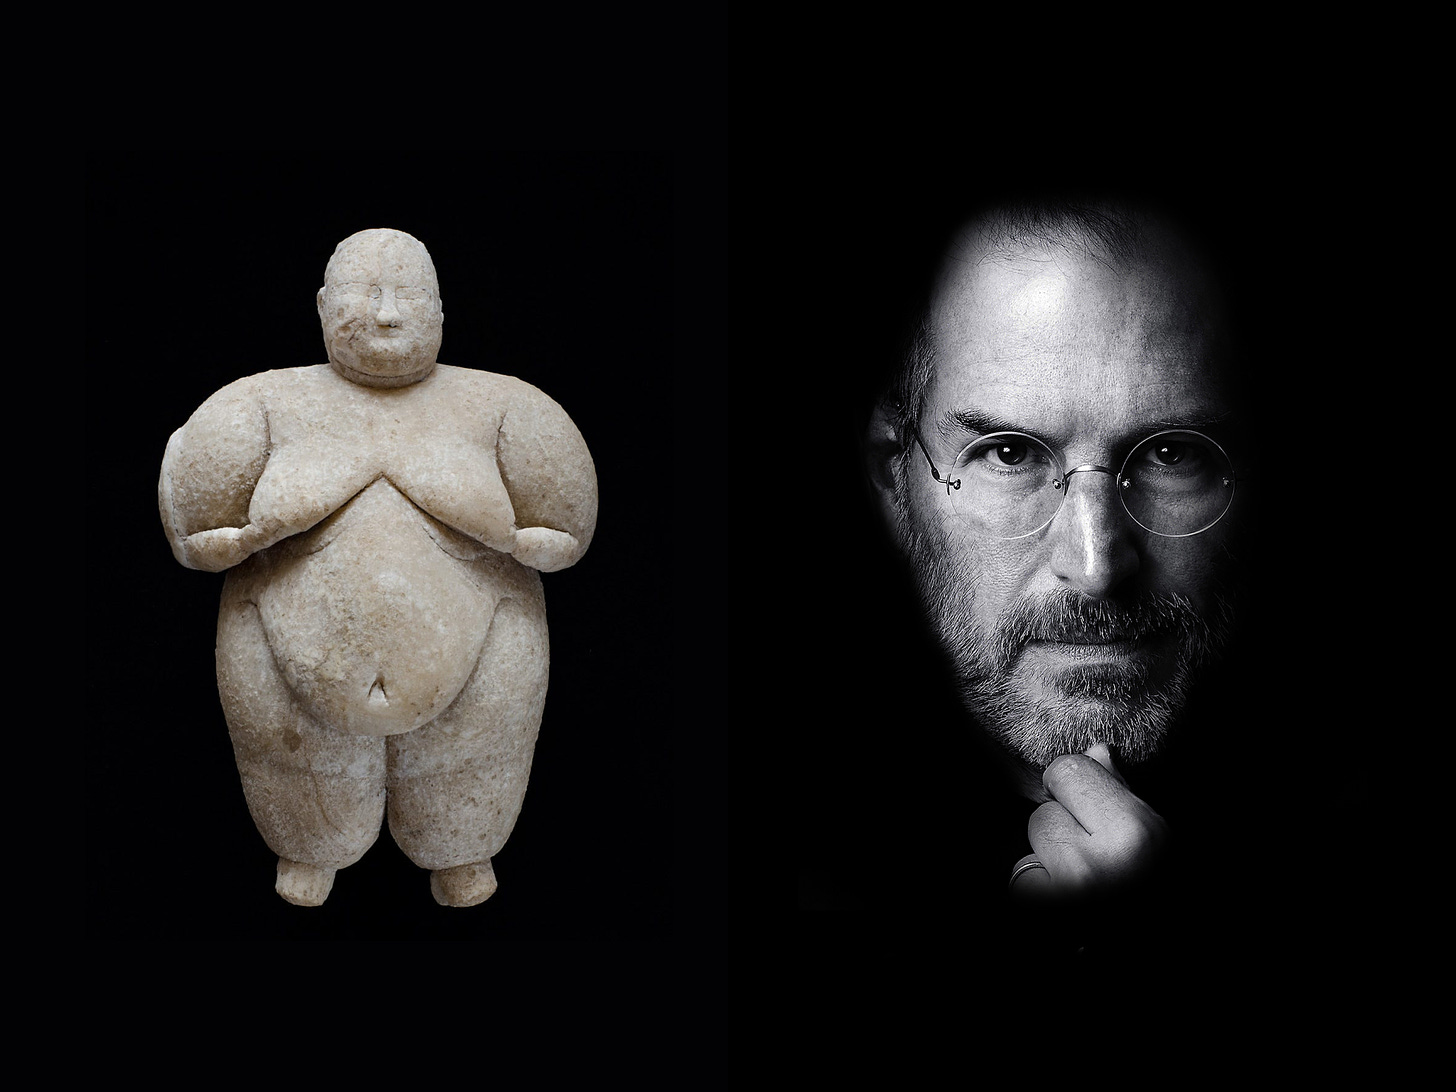 on the left, a Figurine of a woman found at Çatalhöyük, ca. 8,000 years old. Photo by Jason Quinlan, Çatalhöyük Research Project. on the right, steve jobs